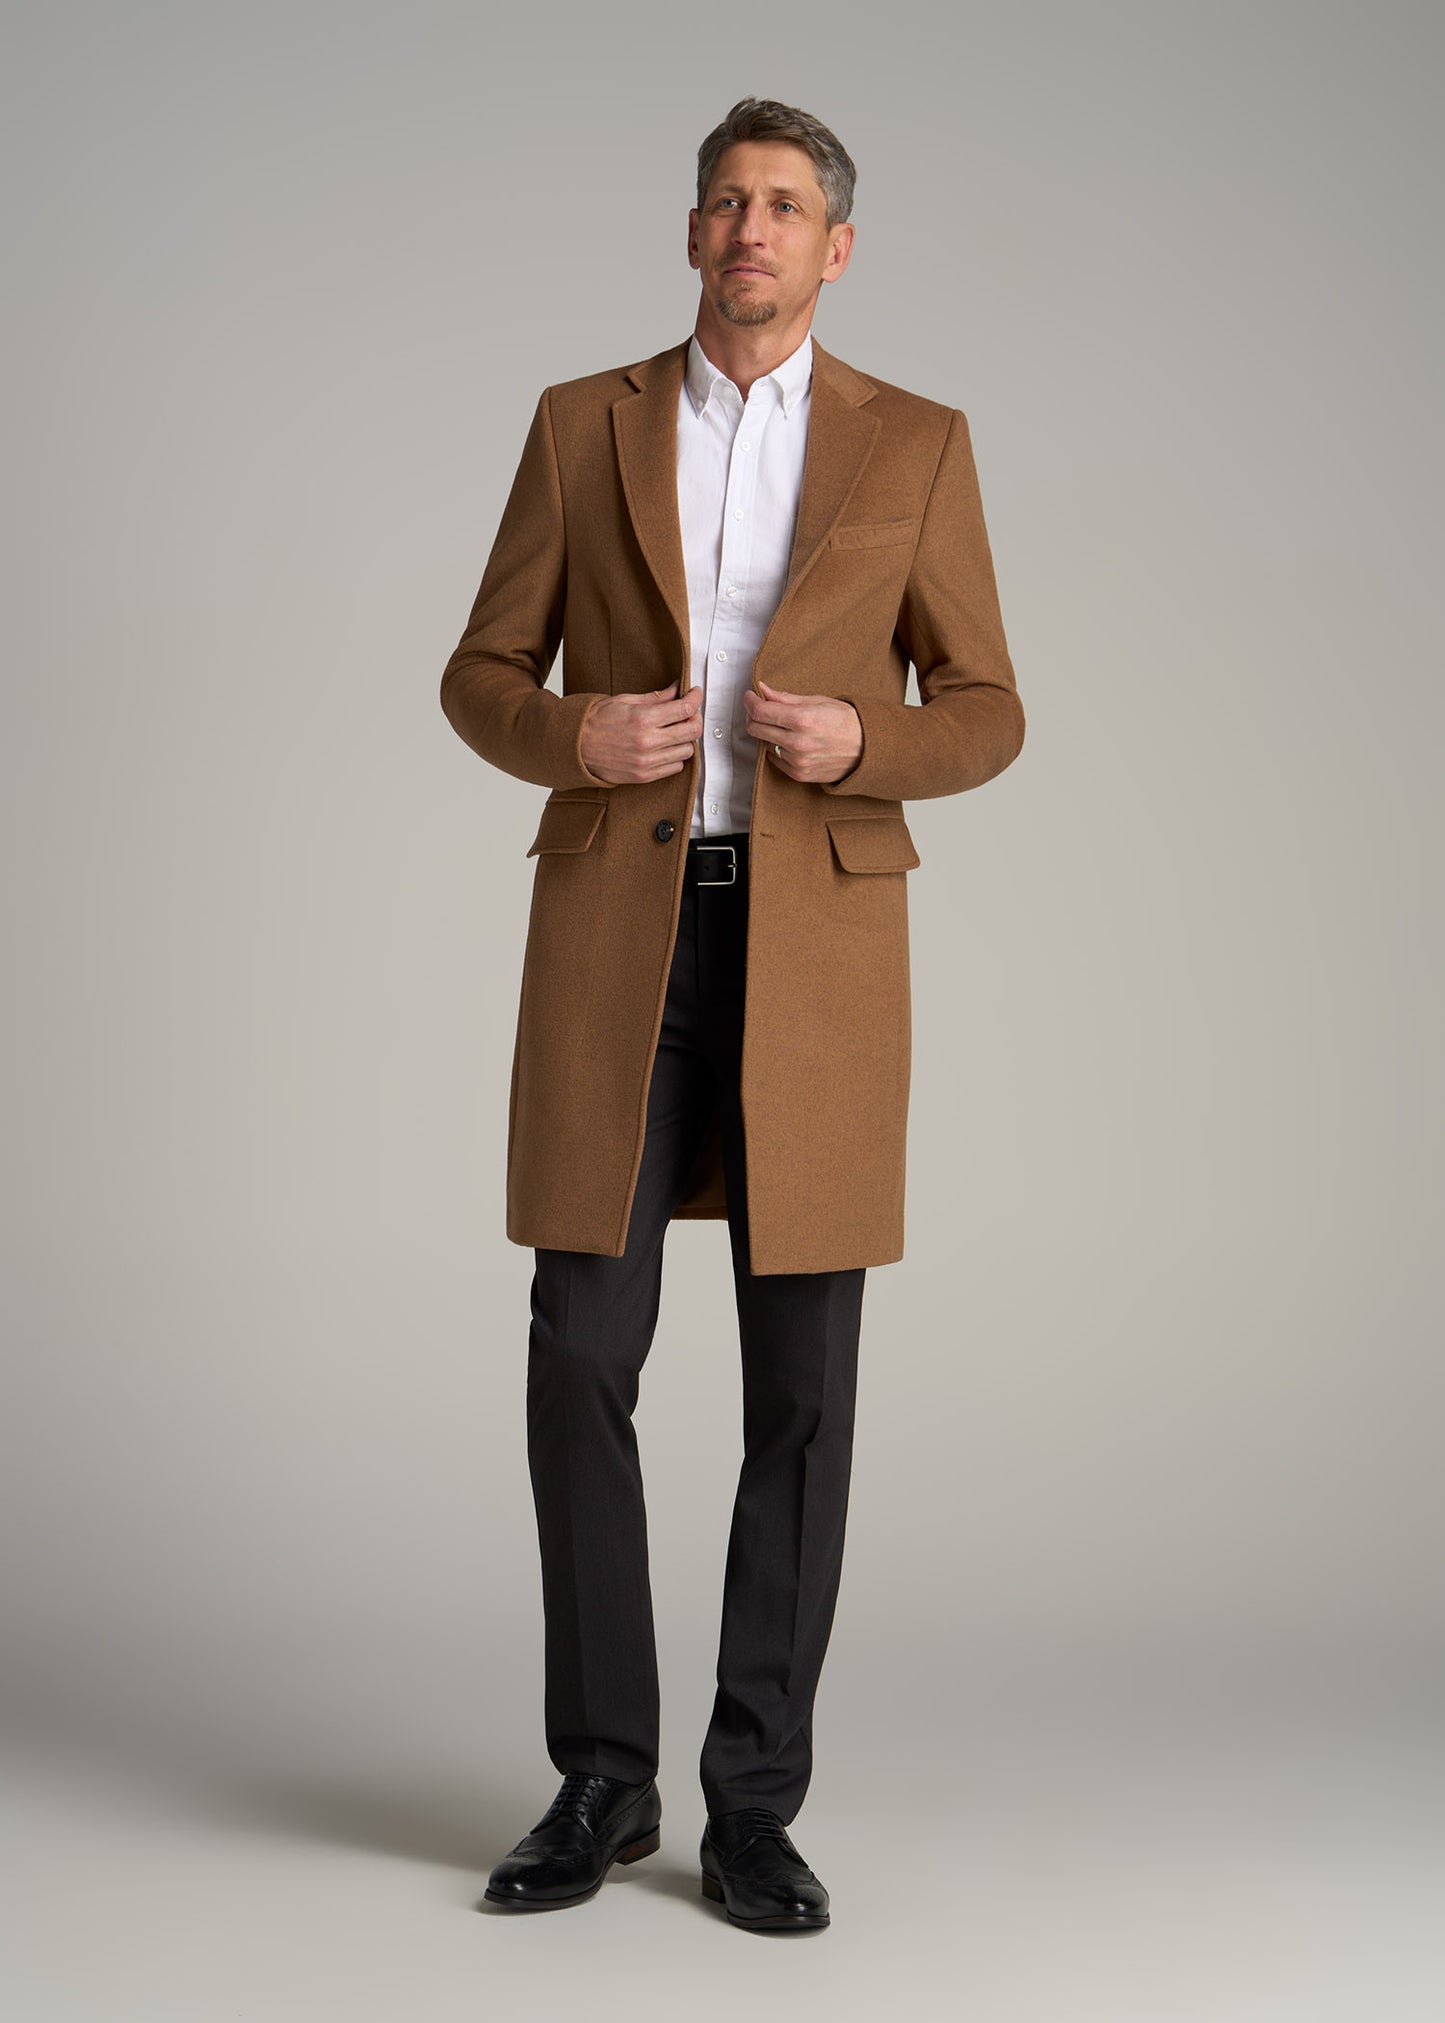 A tall man wearing American Tall's Wool Coat for Tall Men in Camel.